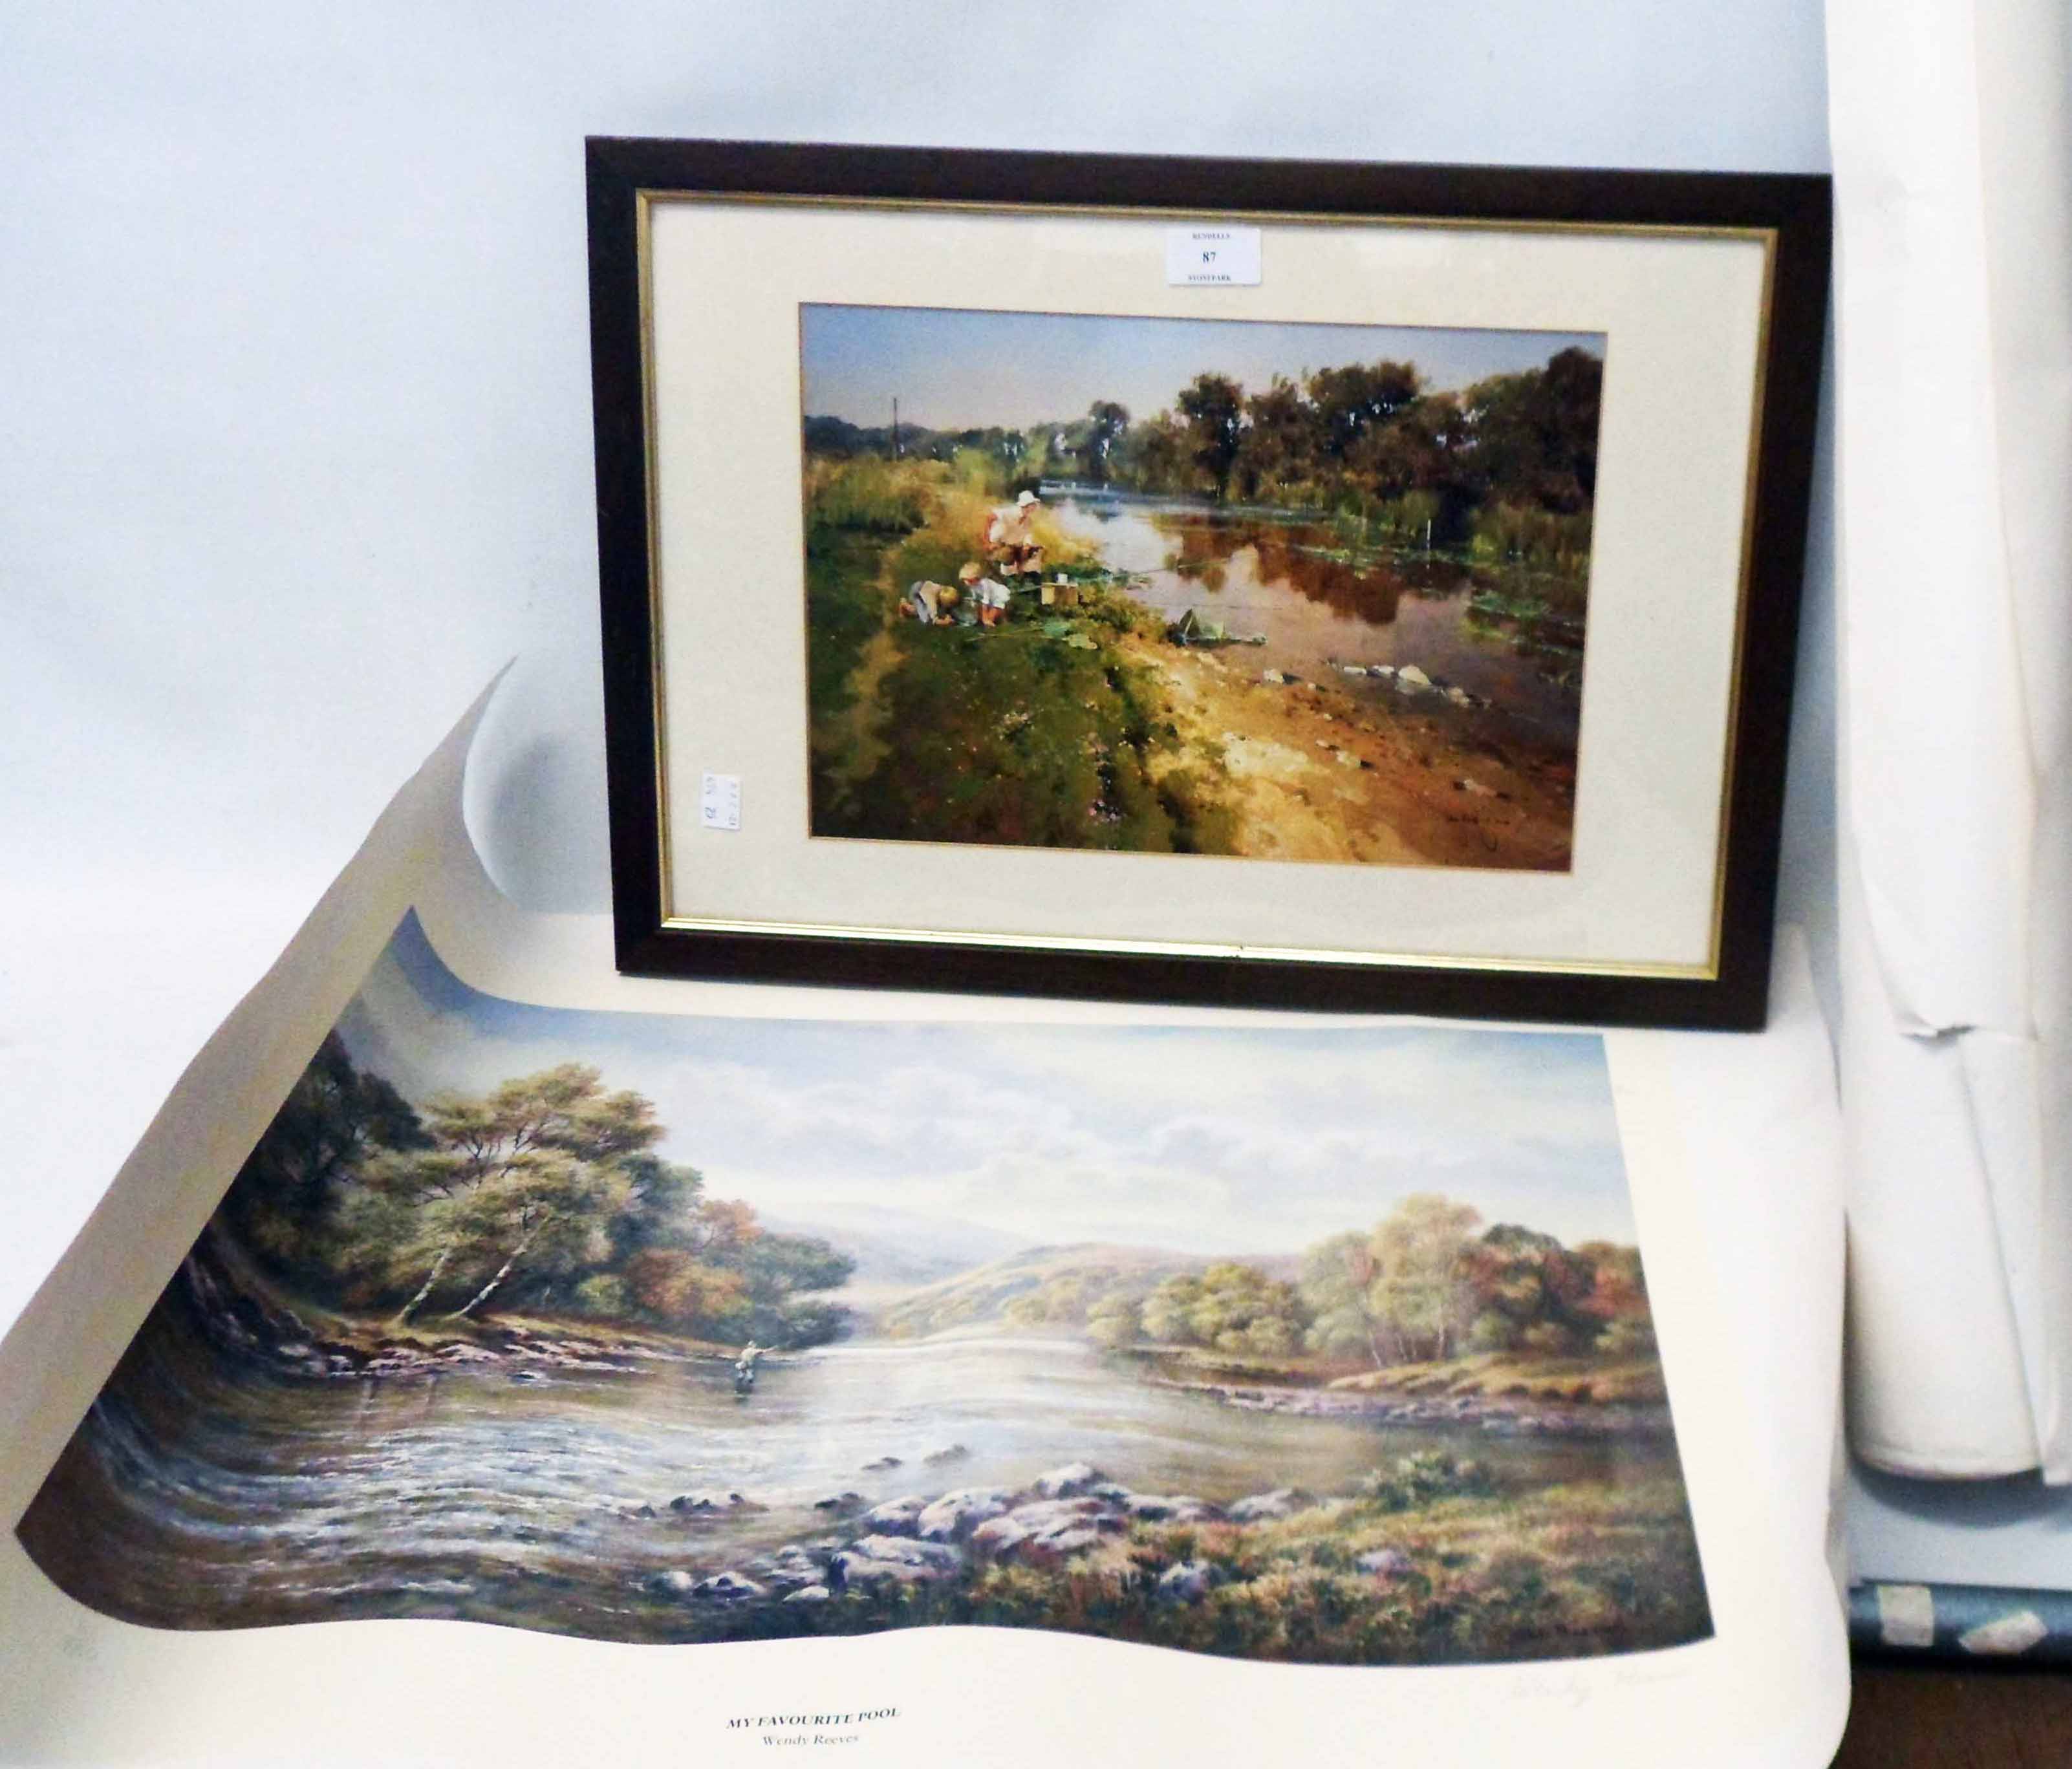 A framed coloured print, depicting figures fishing by a river - sold with four unframed rolled